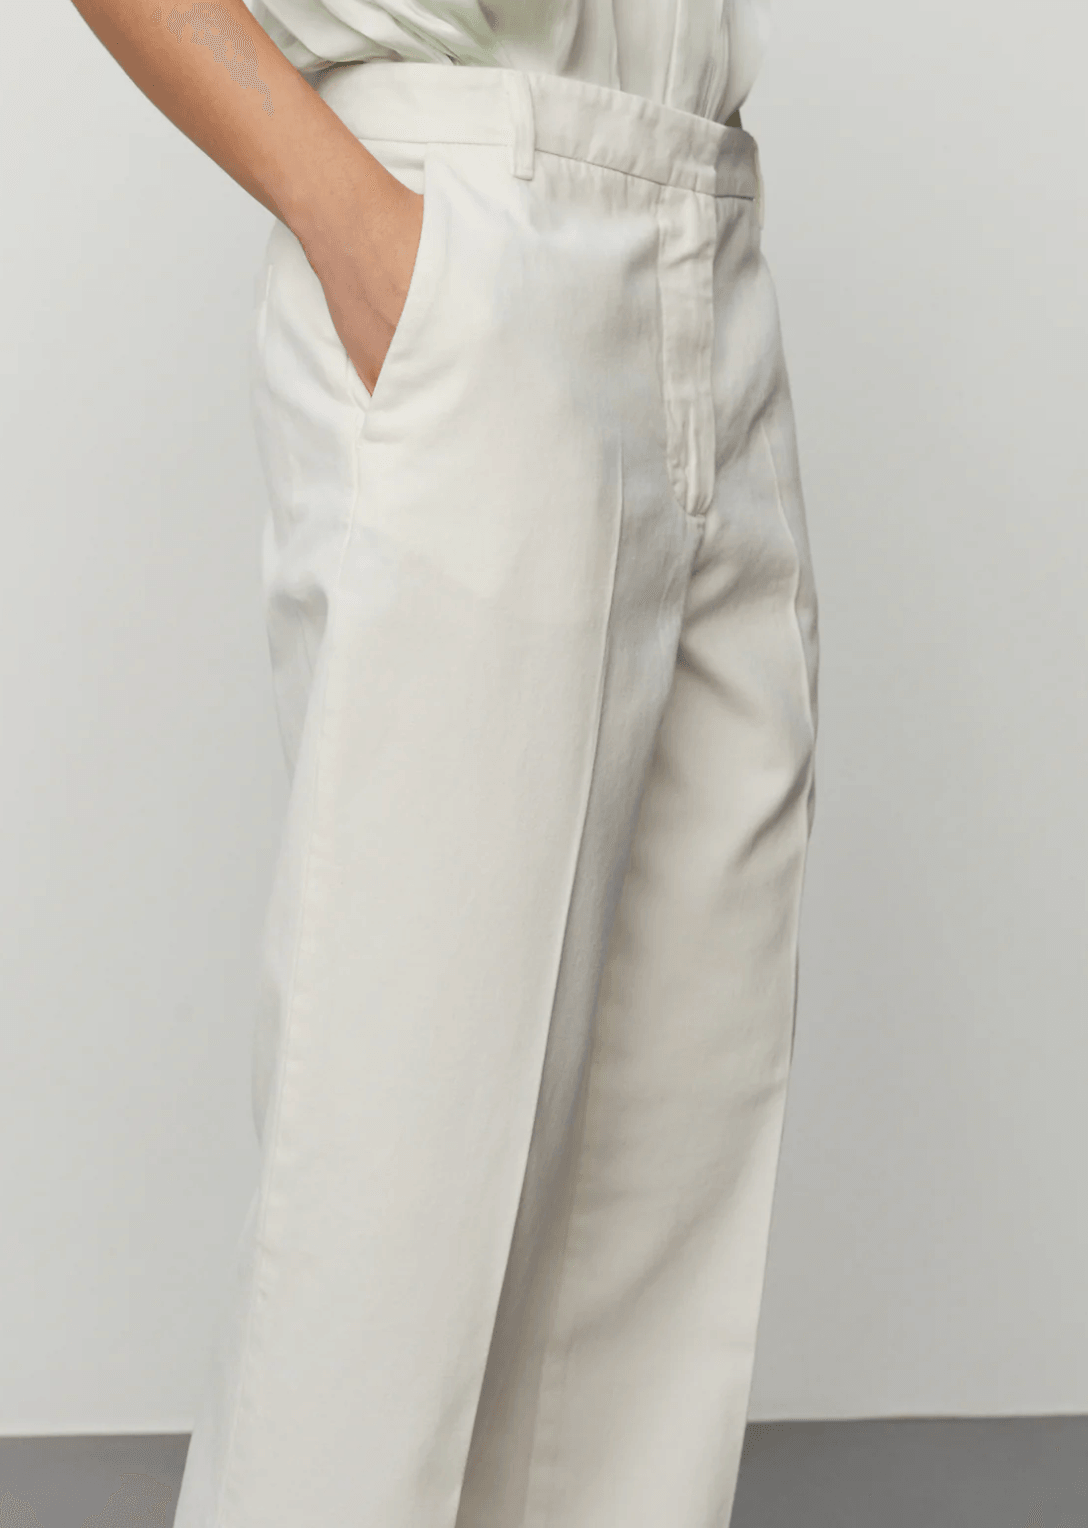 DAY BIRGER - Calle Star White Soft Canvas Twill Trousers - 32 The Guild